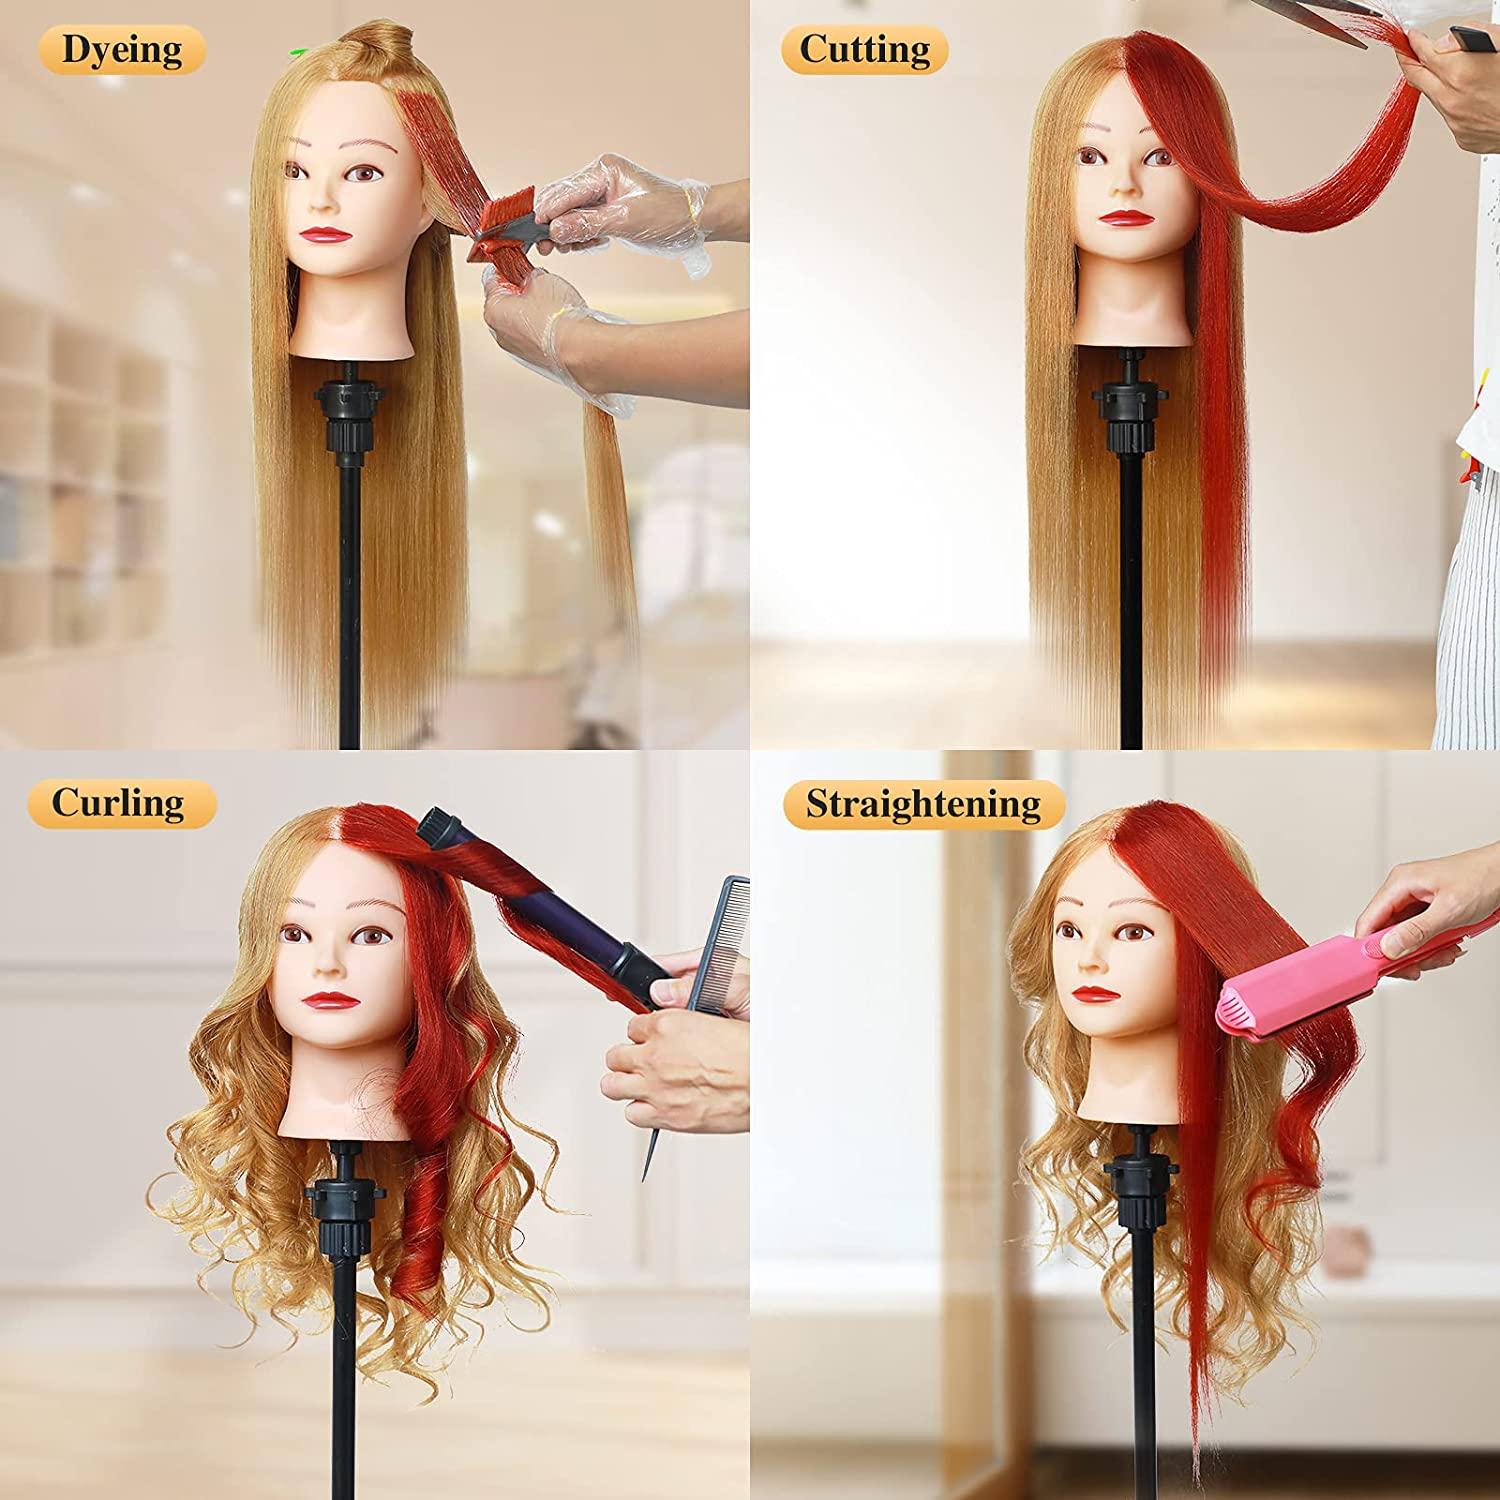  Doll Head For Hair Styling